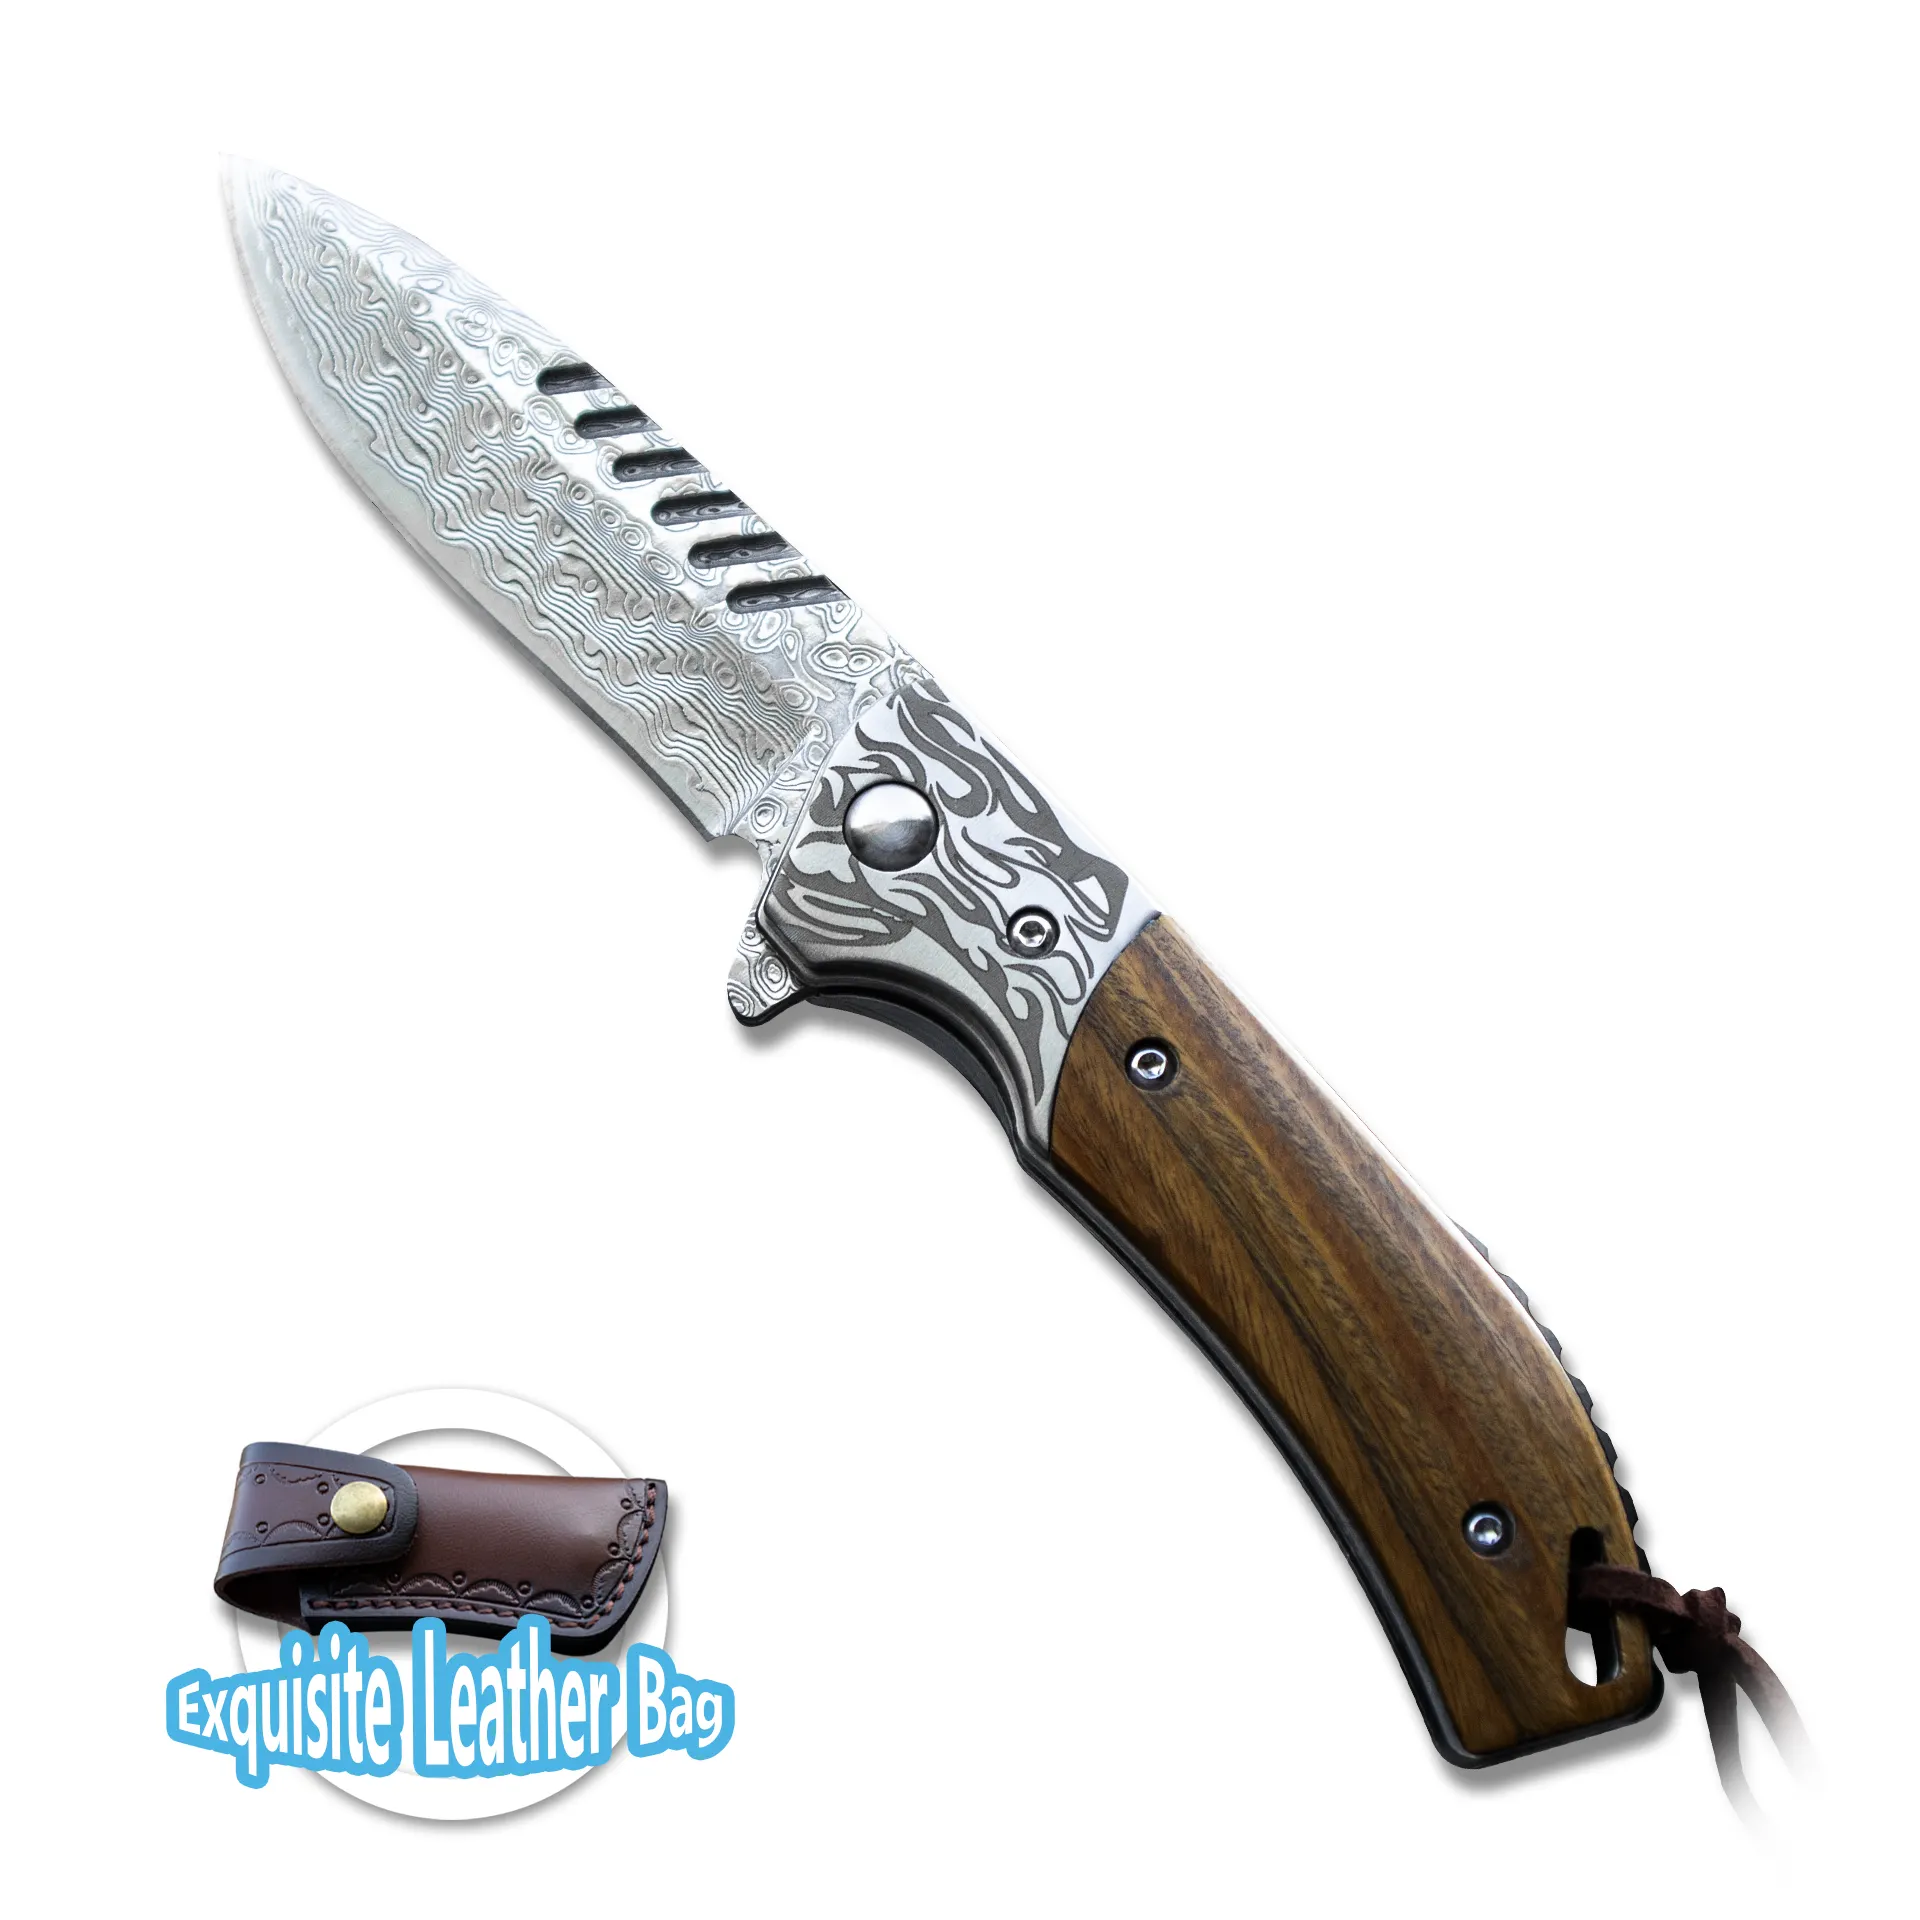 Hot Selling Competitive Price Damascus steel Verawood handle folding knife Outdoor knife Camping knife